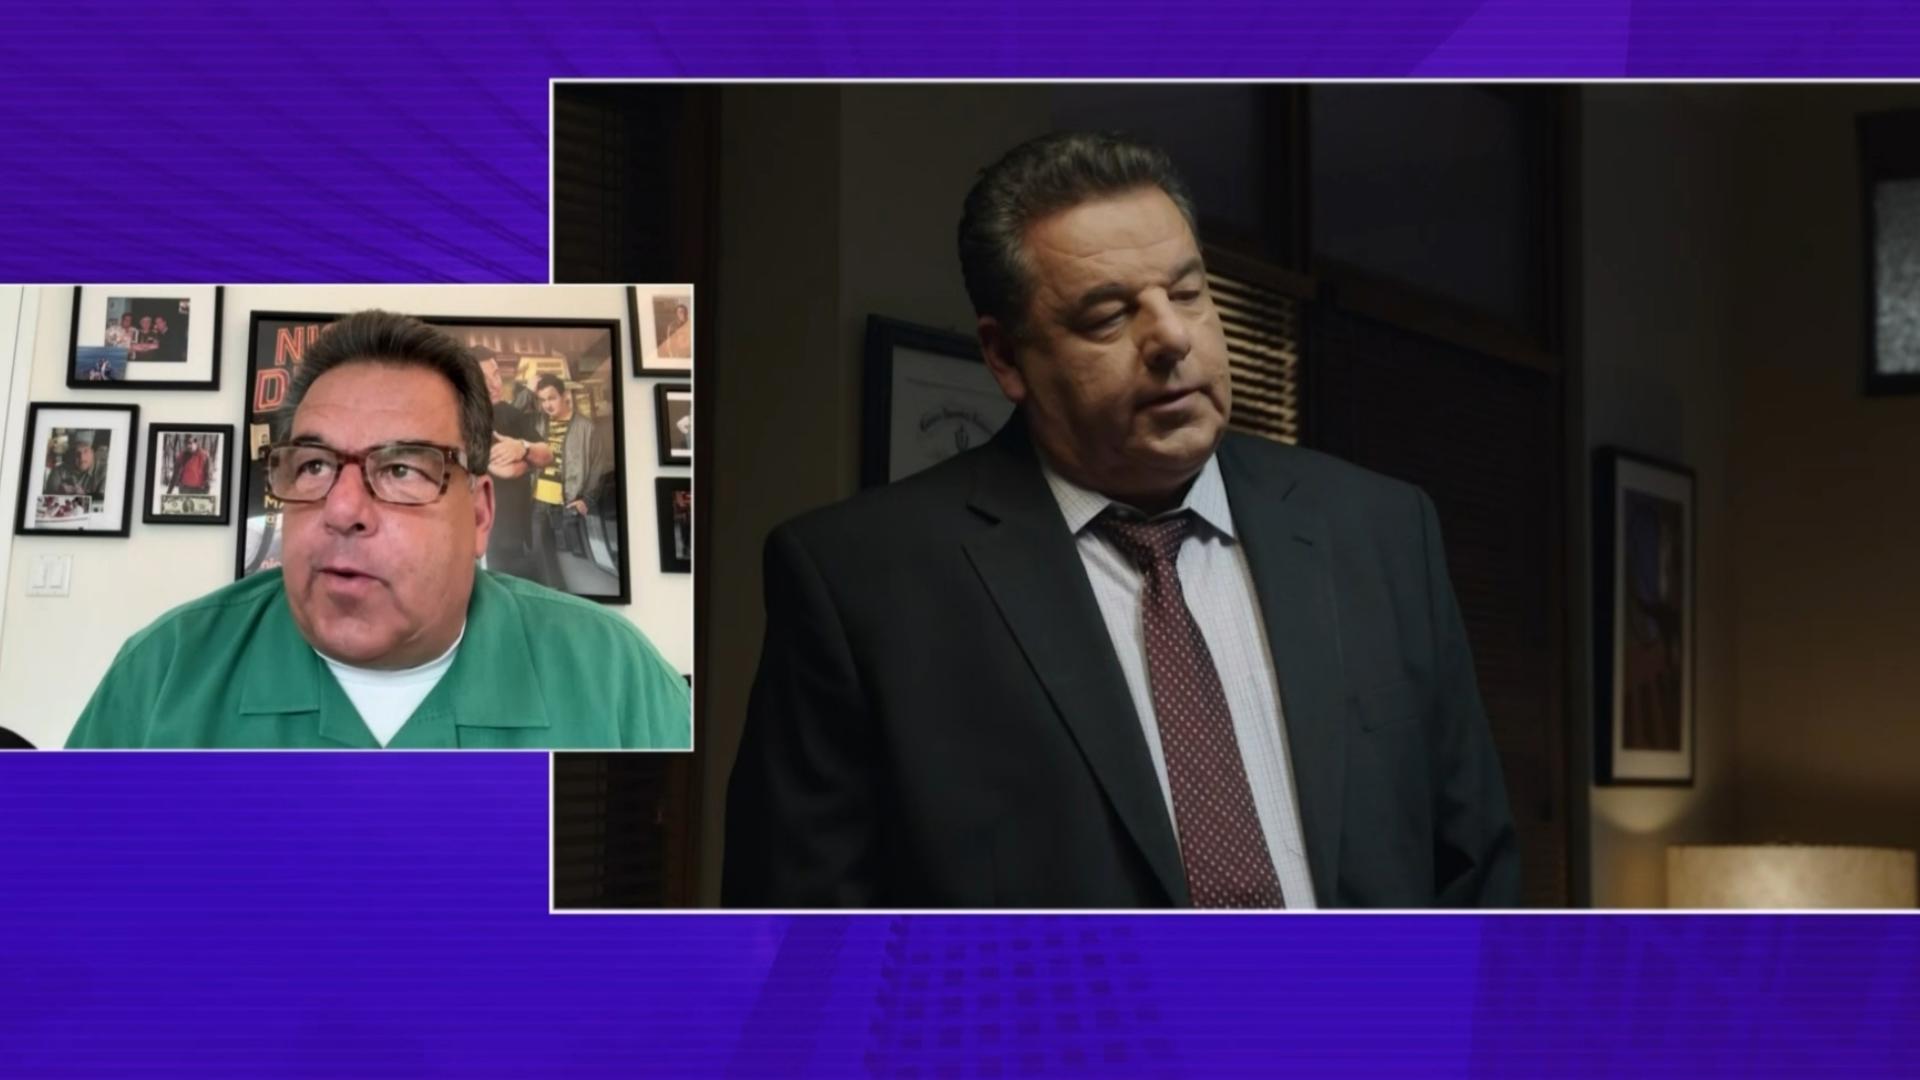 Ron Treviño spoke with Steve Schirripa about "Blue Bloods," Sopranos and baseball.